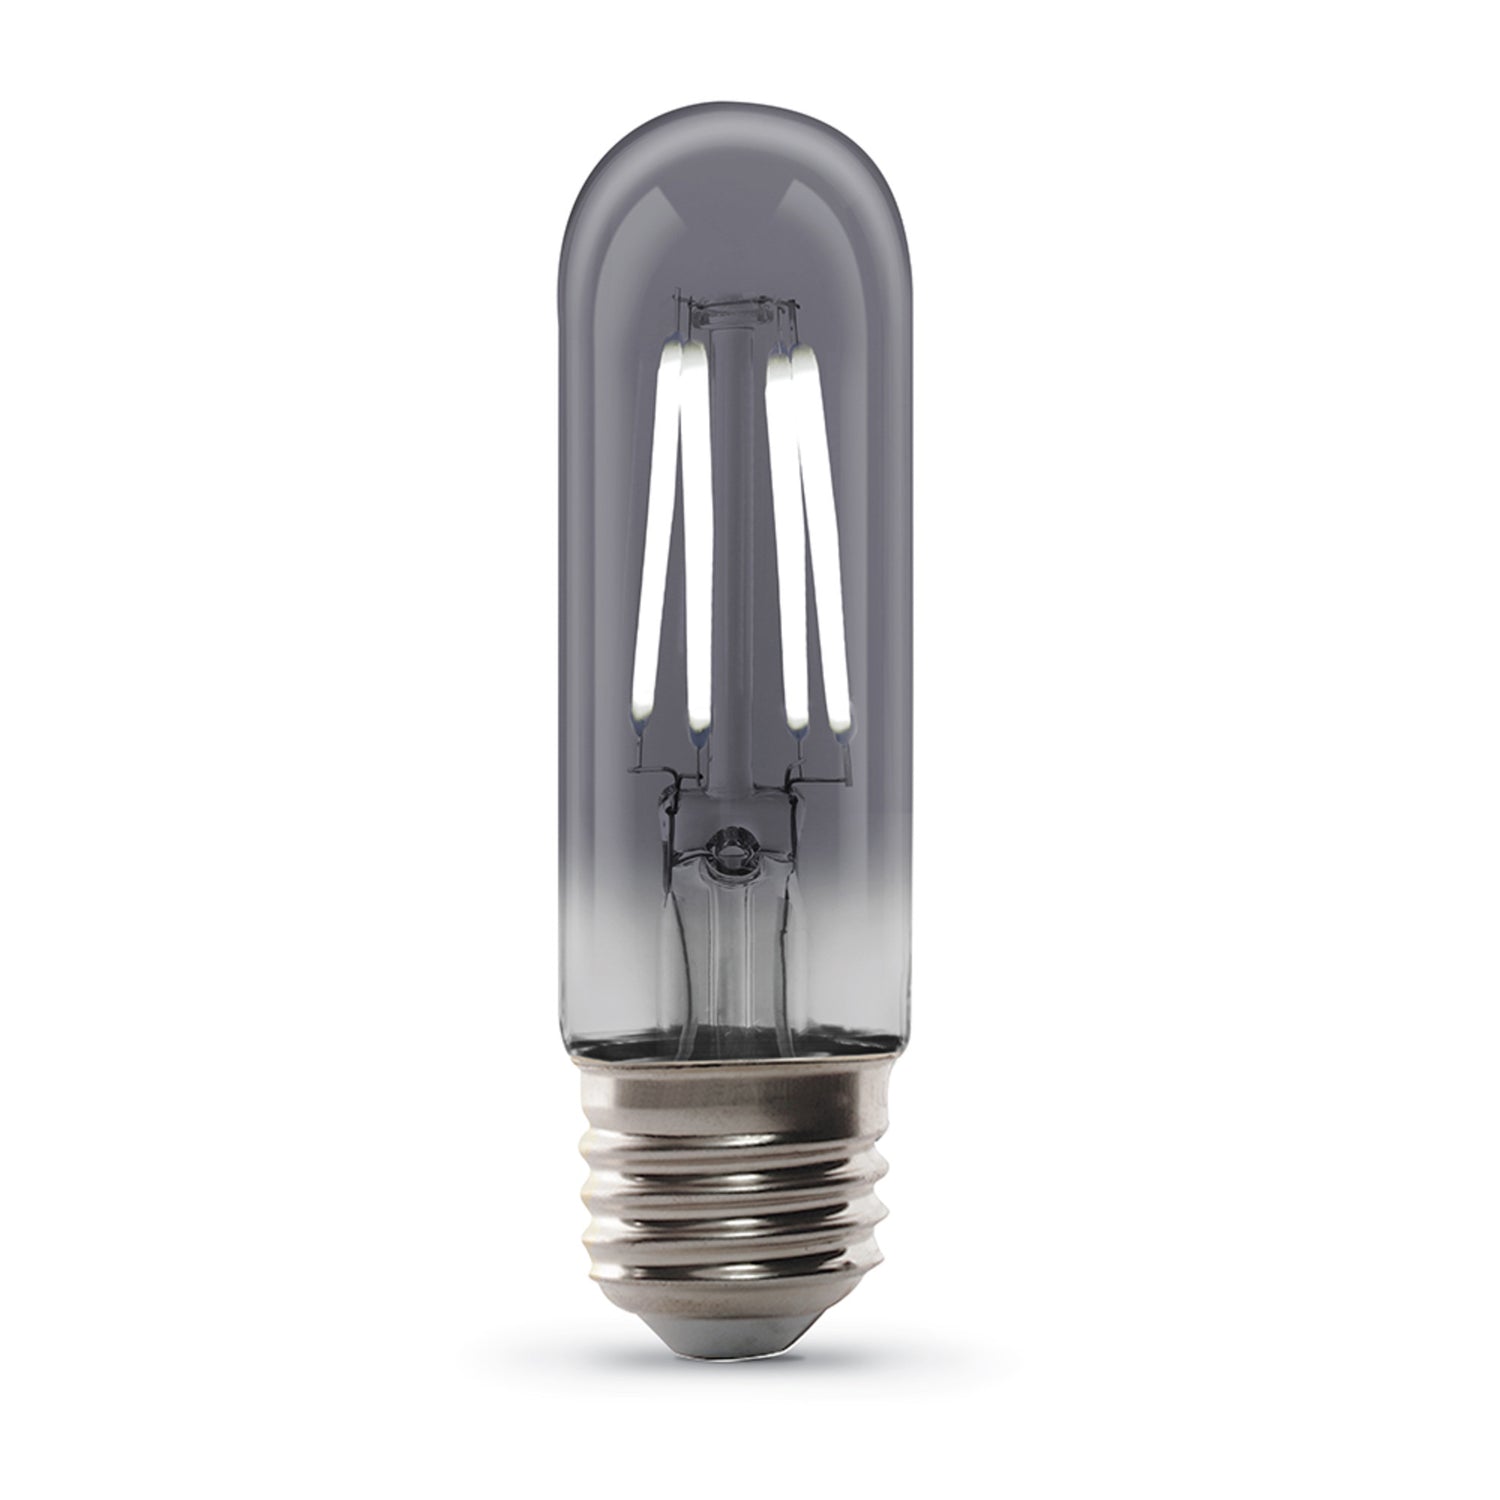 4W (25W Replacement) T10 E26 Dimmable Straight Filament Smoke Glass Vintage Edison LED Light Bulb, Daylight